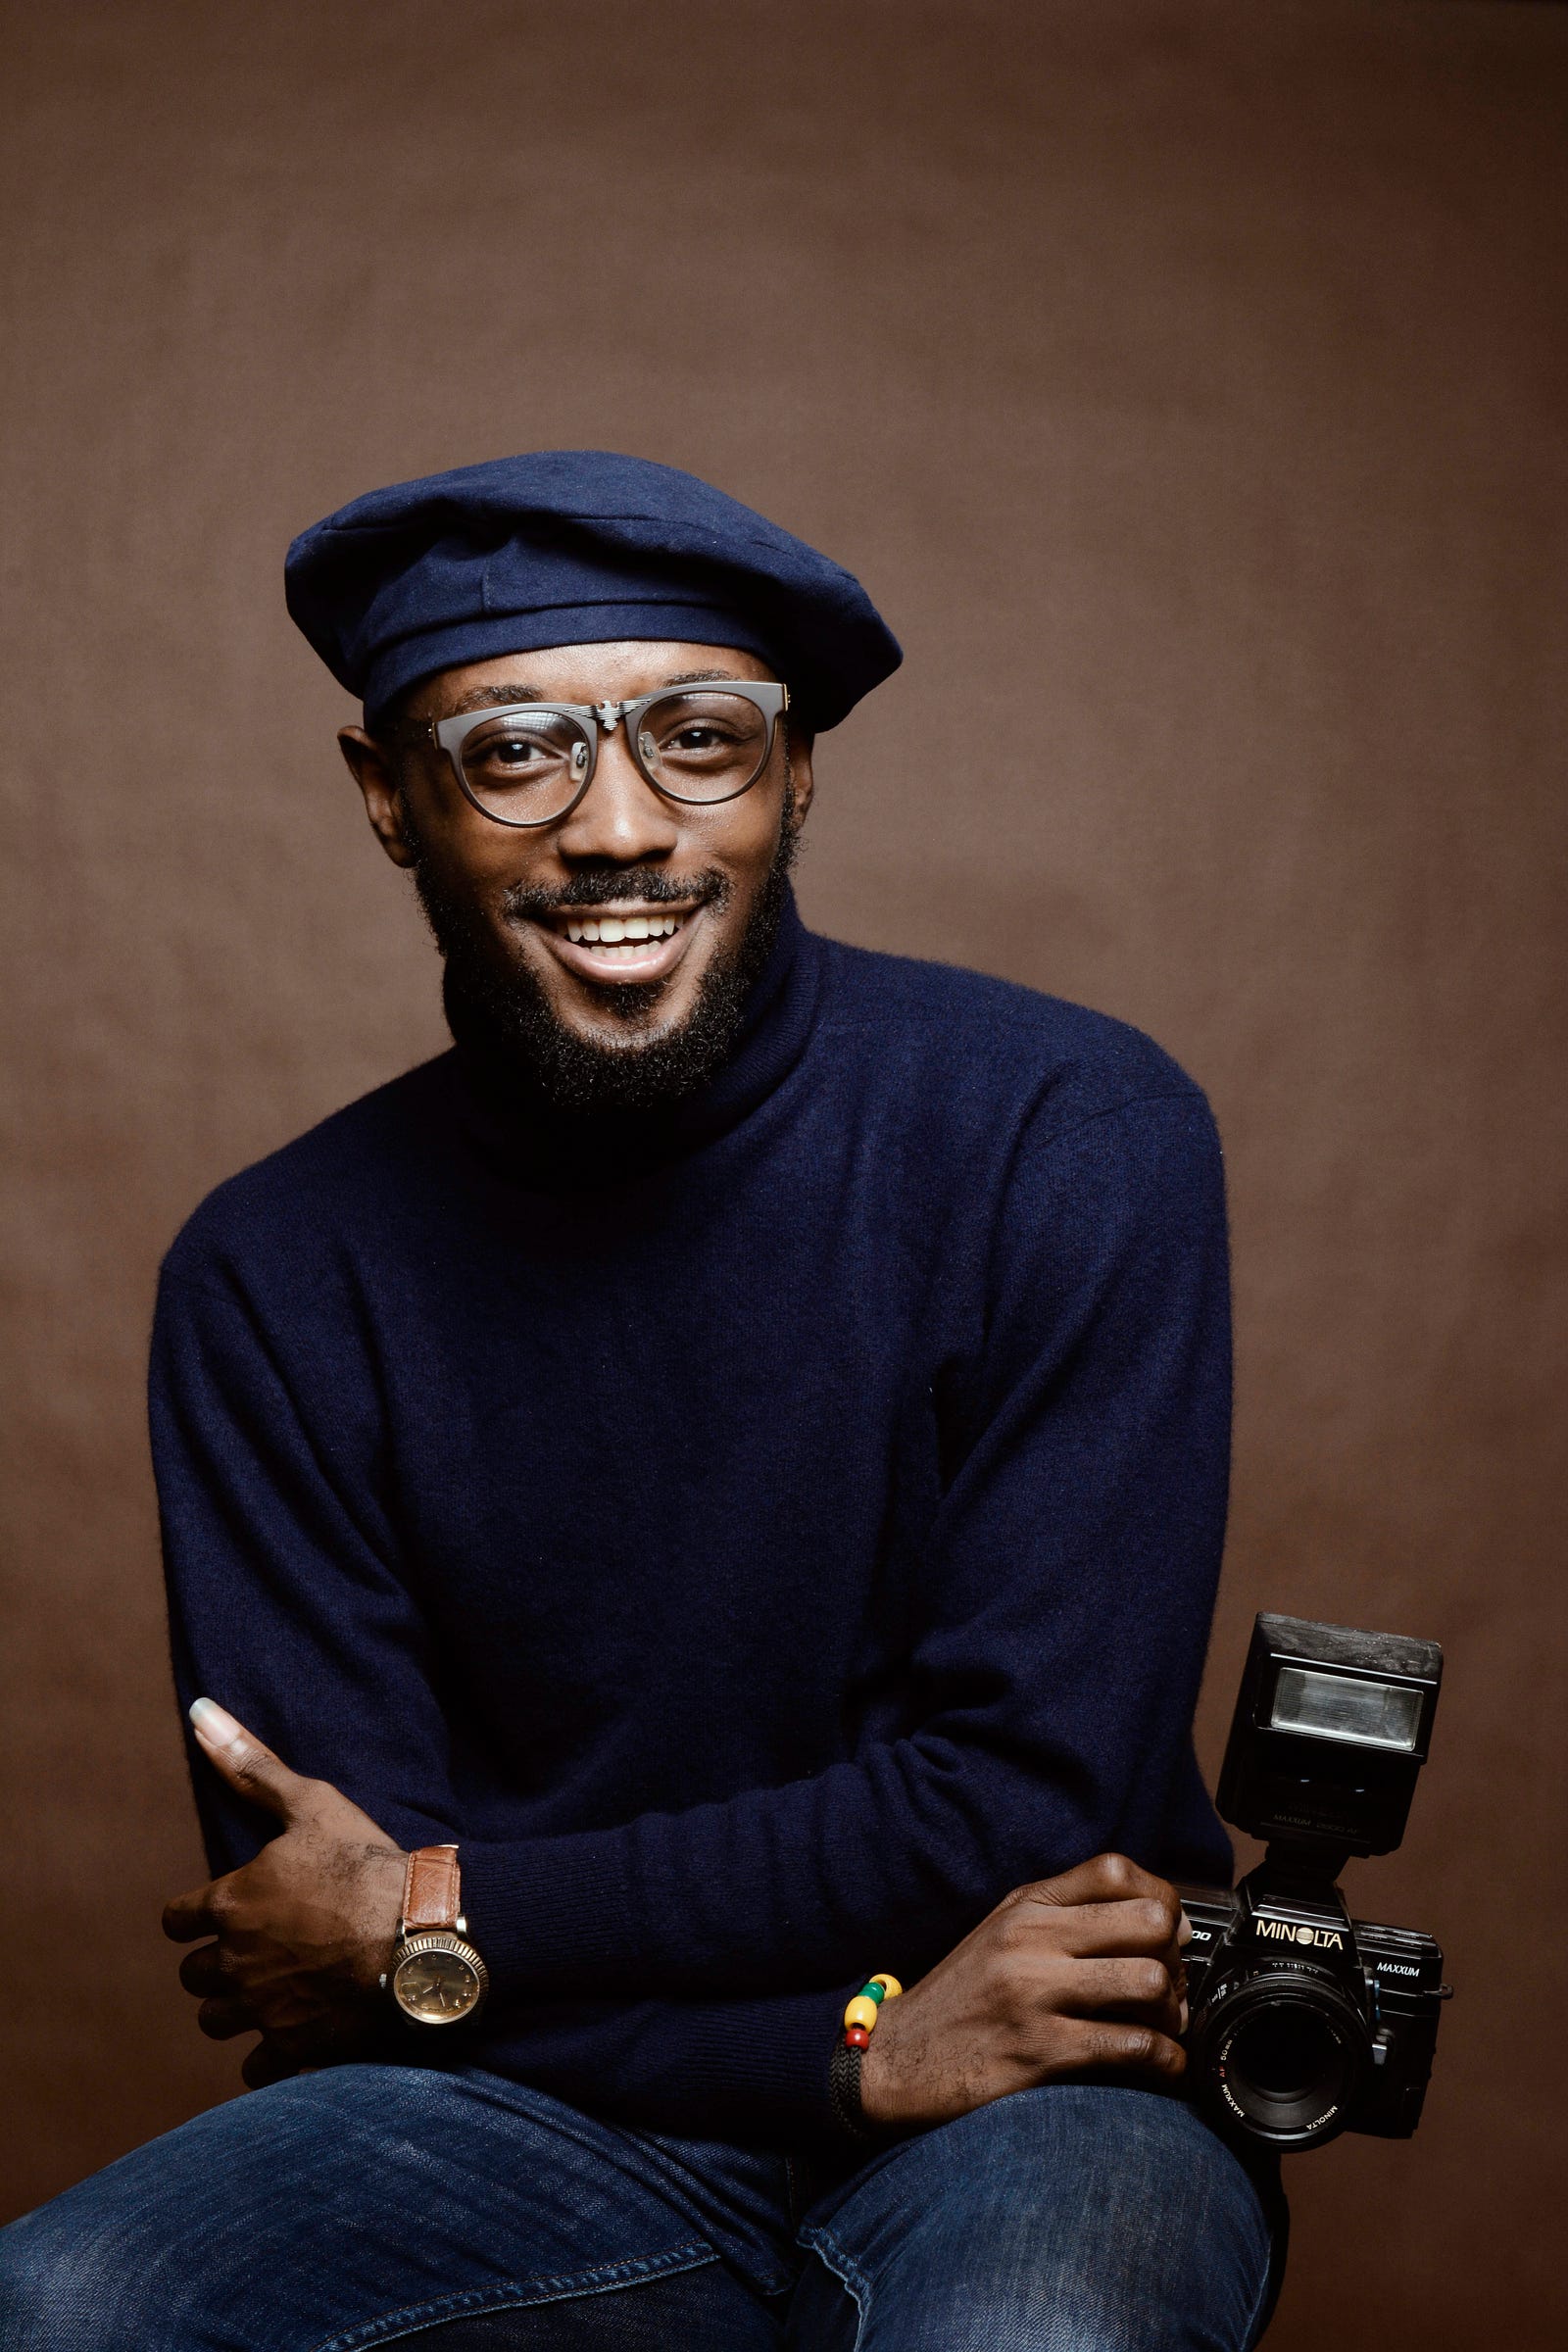 A smiling Black man dons glasses and a hat. Here are the recommended starting ages for prostate cancer screenings: Men at average risAge 45 for men at high risk of developing prostate cancer. The high-risk category includes African American men and men who have a first-degree relative (father or brother) diagnosed with prostate cancer at an early age (younger than age 65). Age 40 for men at even higher risk (those with more than one first-degree relative who had prostate cancer at an early age).